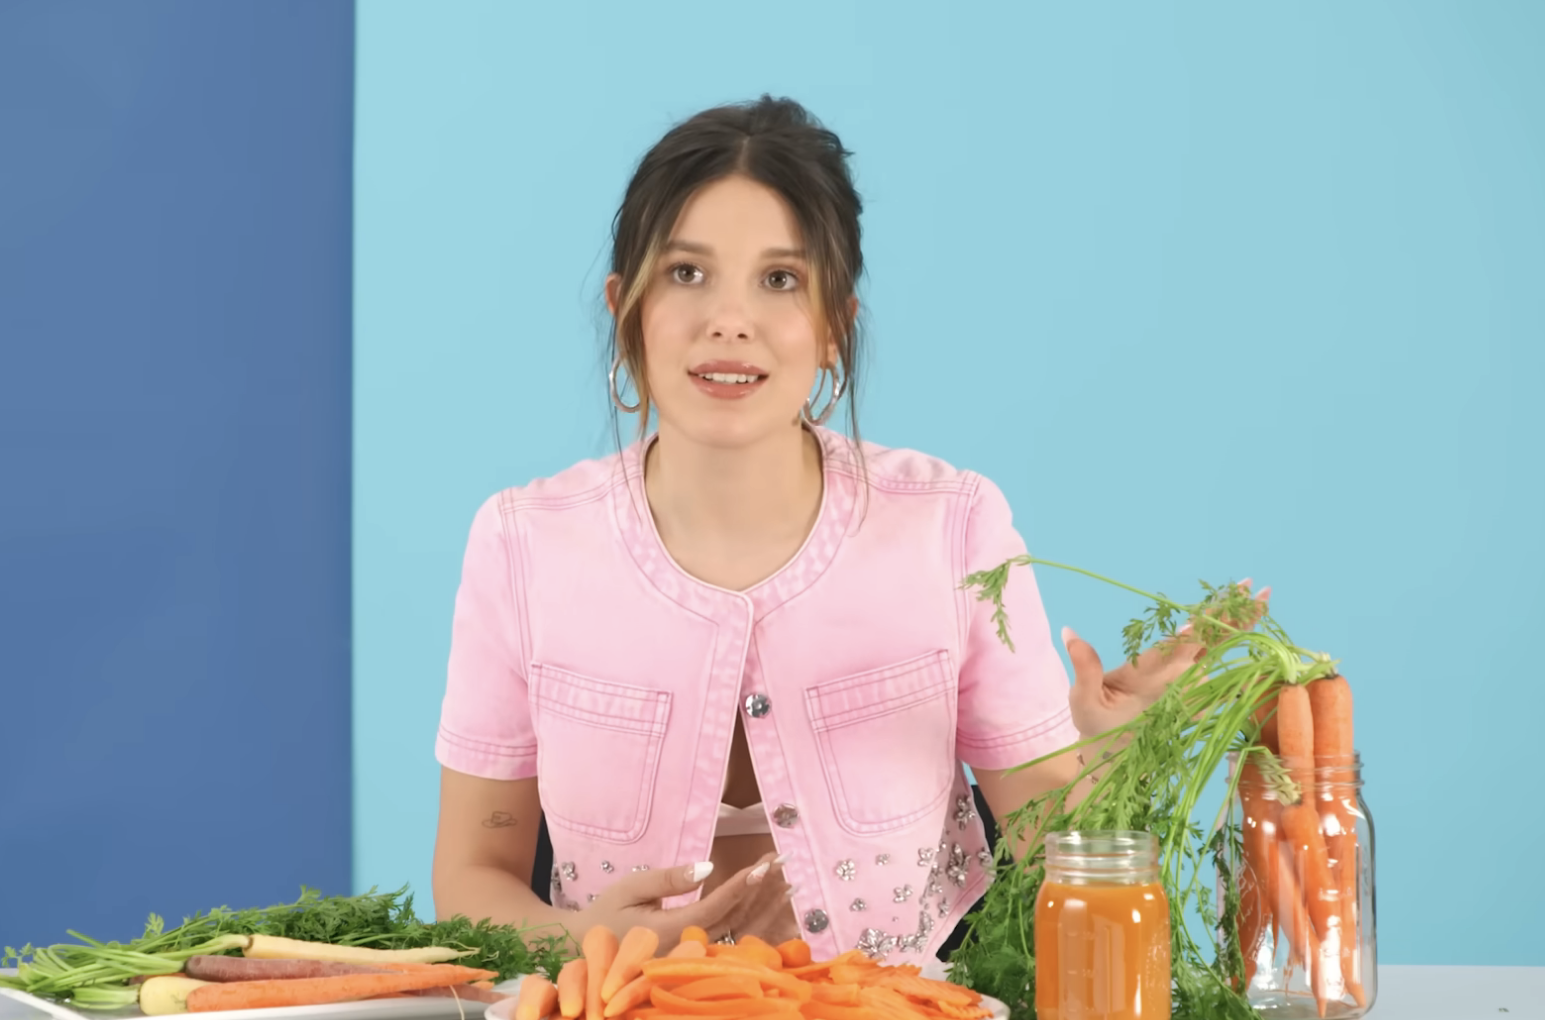 Millie from the YouTube video with carrots in various containers